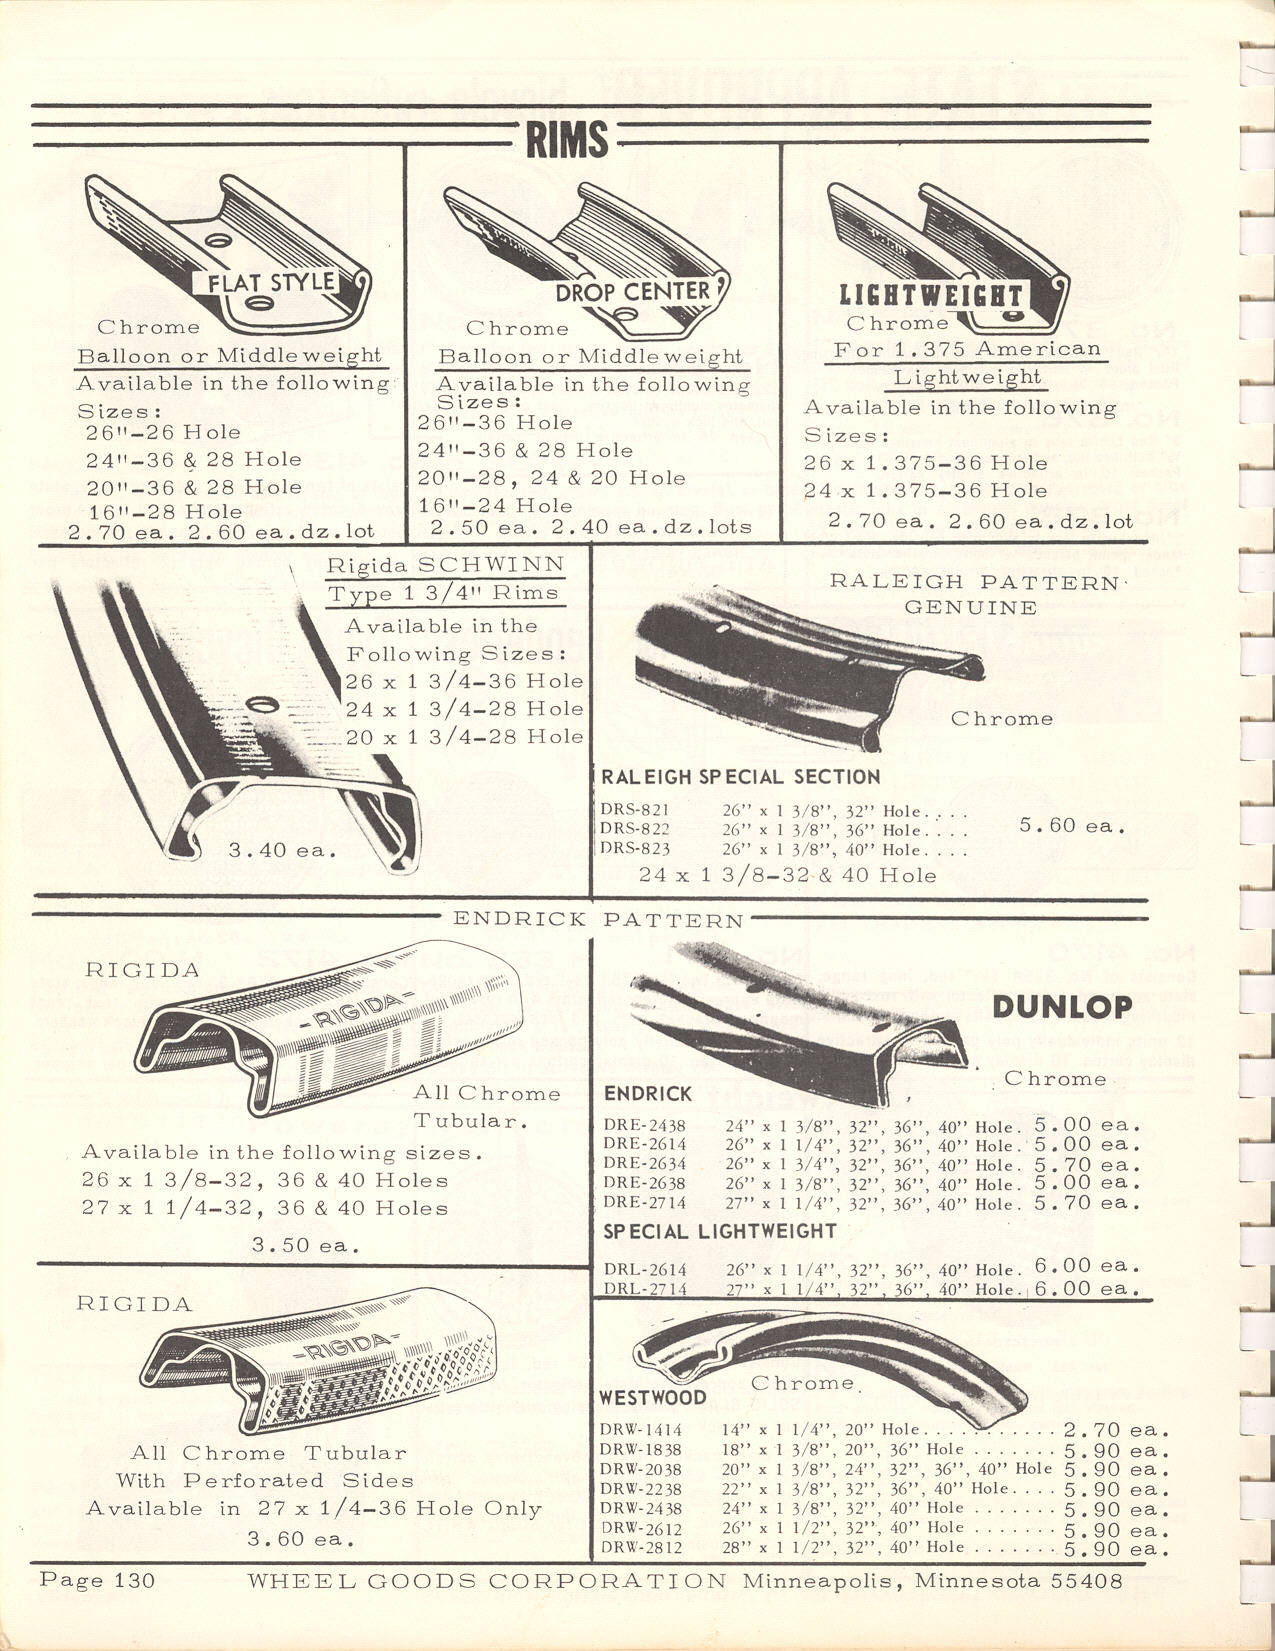 Wheelgoods Corporation (1967) - Page 130